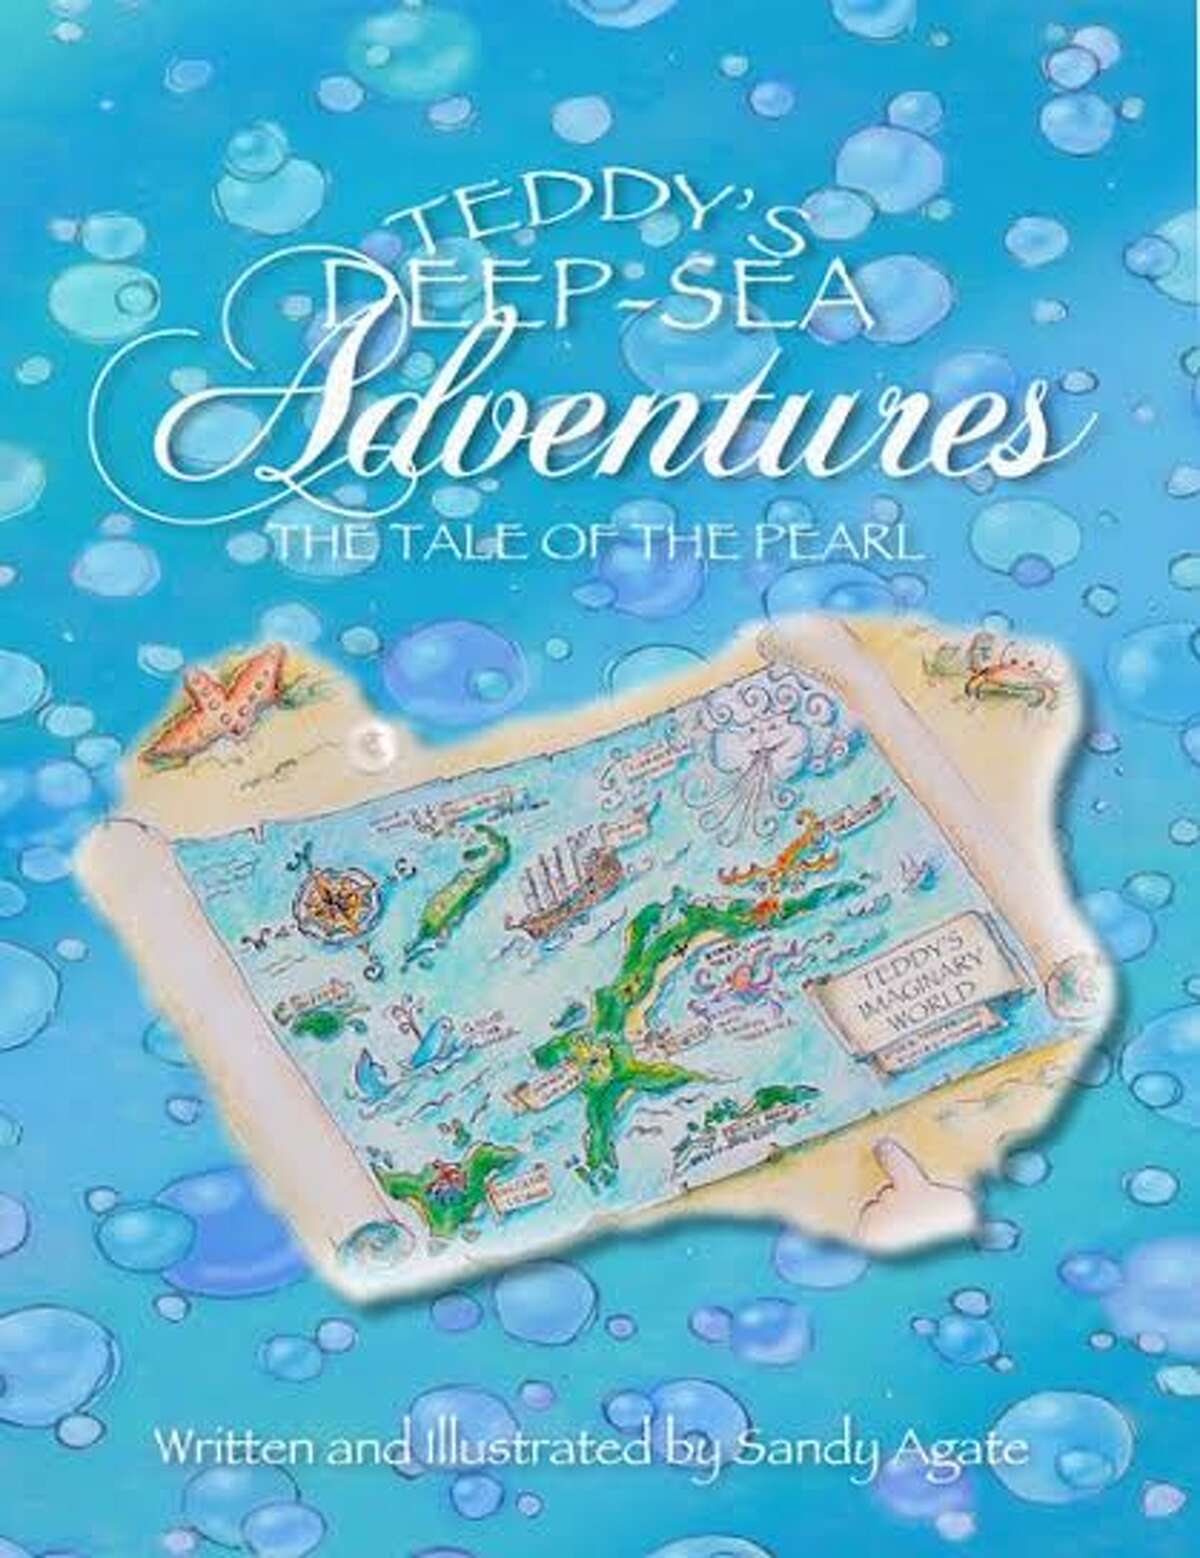 The cover of Teddy's Deep-Sea Adventures: The Tale of the Pearl, which was written and illustrated by Trumbull artist-turned-author Sandy Agate.